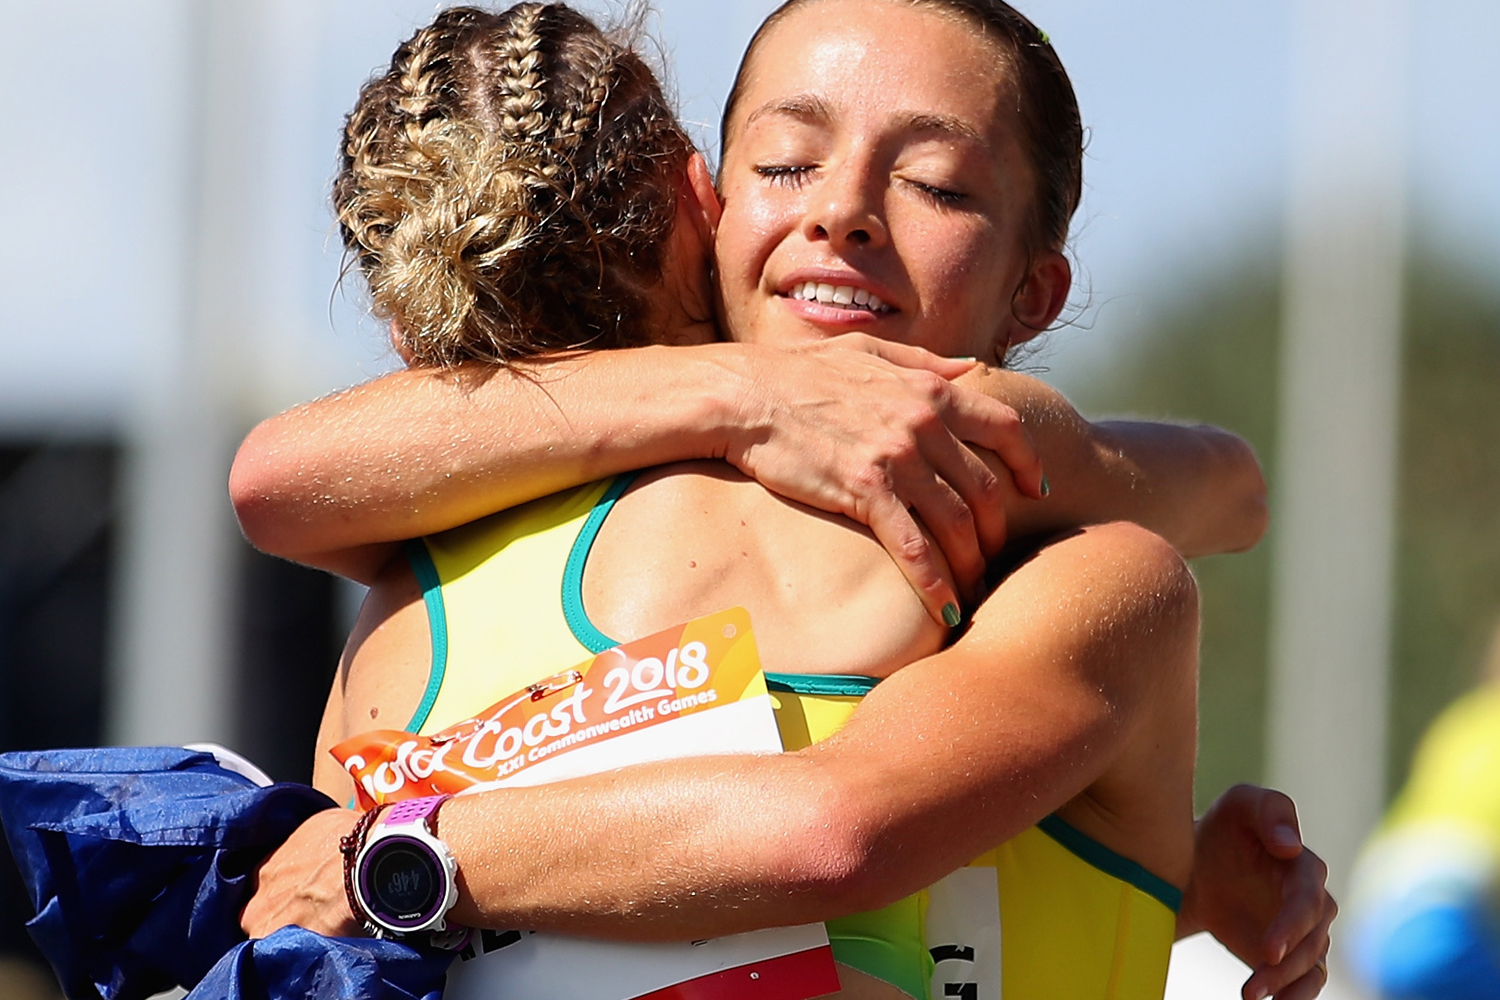 This Beautiful Moment Sums Up What The Commonwealth Games Are All About